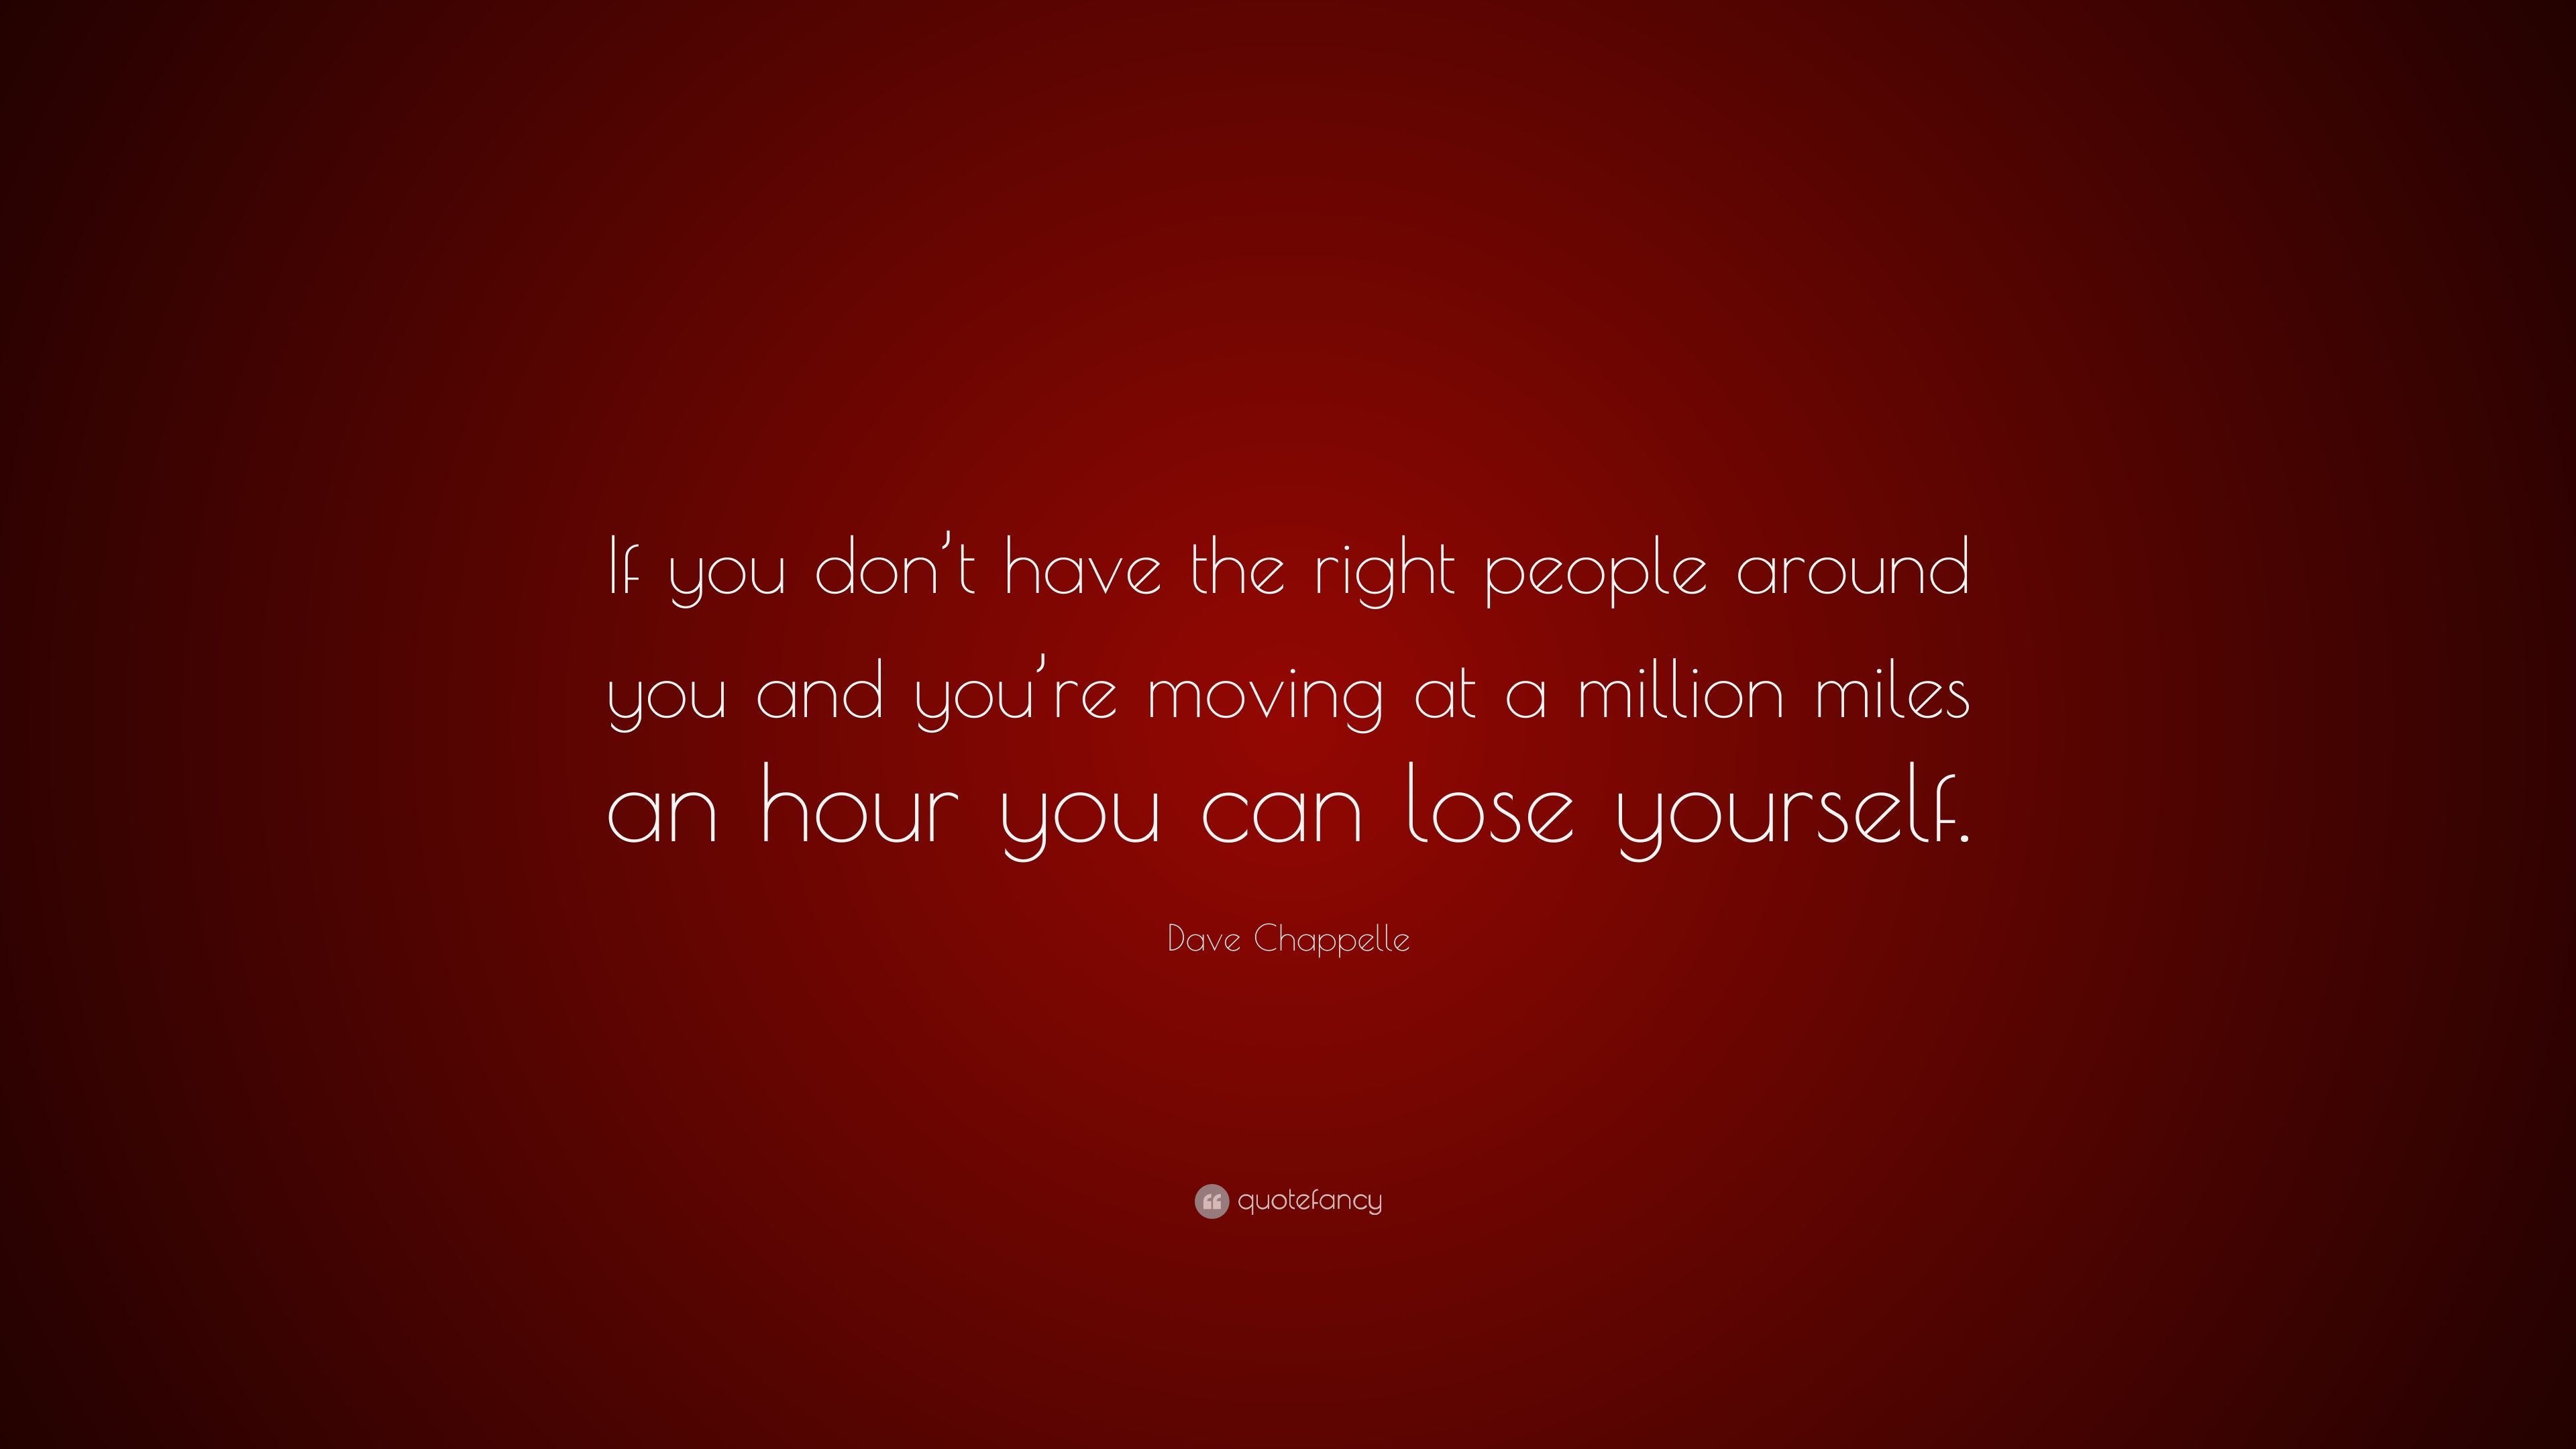 Dave Chappelle Quote: “If you don't have the right people around